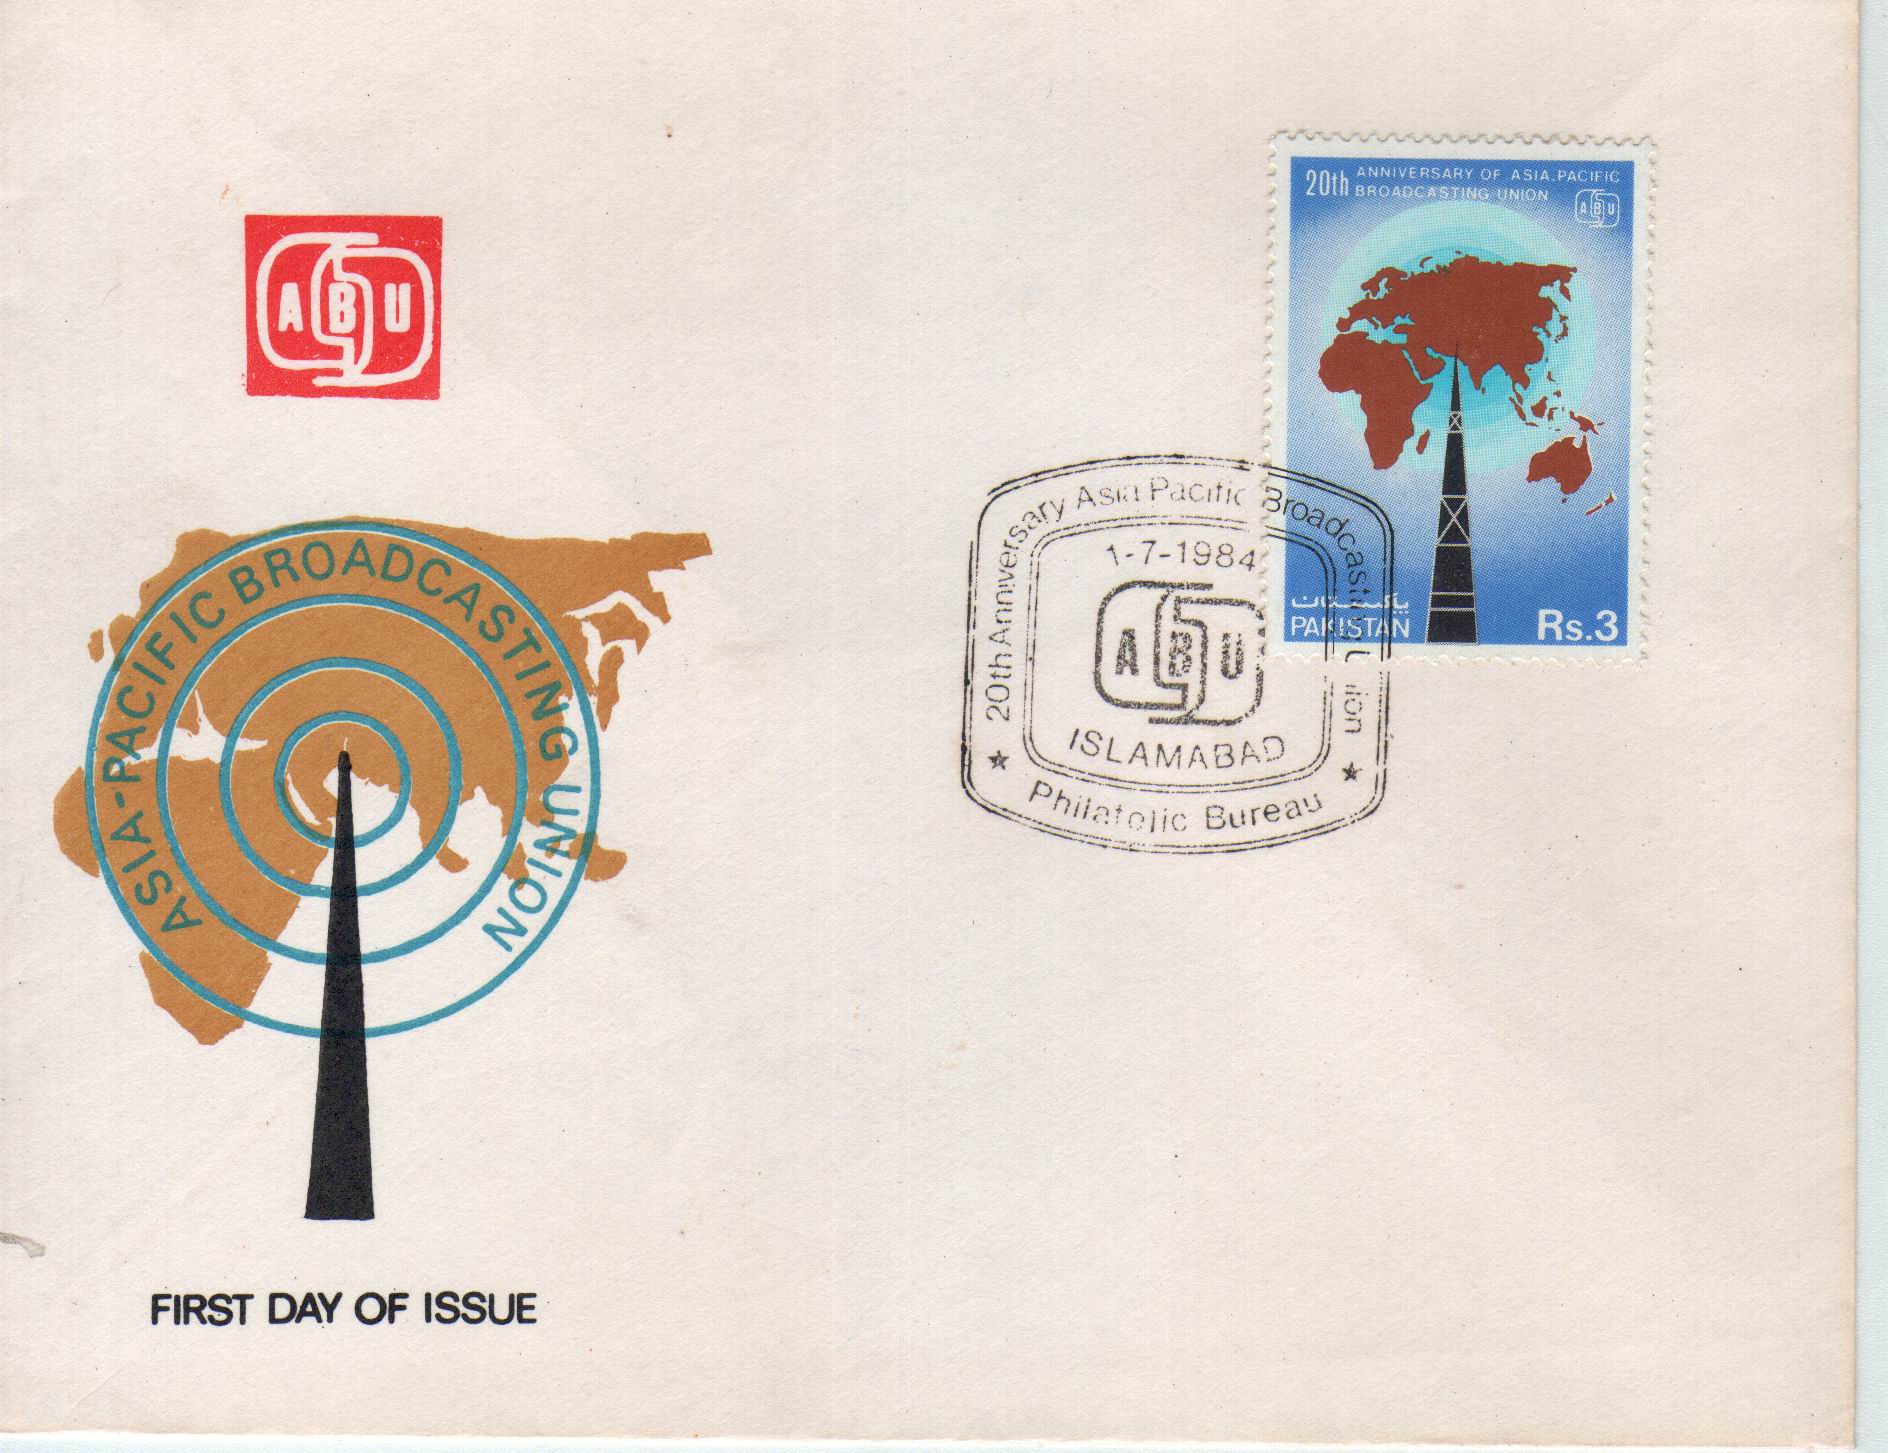 Pakistan Fdc 1984 Brochure & Stamp Asia Pacific Tele Community - Click Image to Close